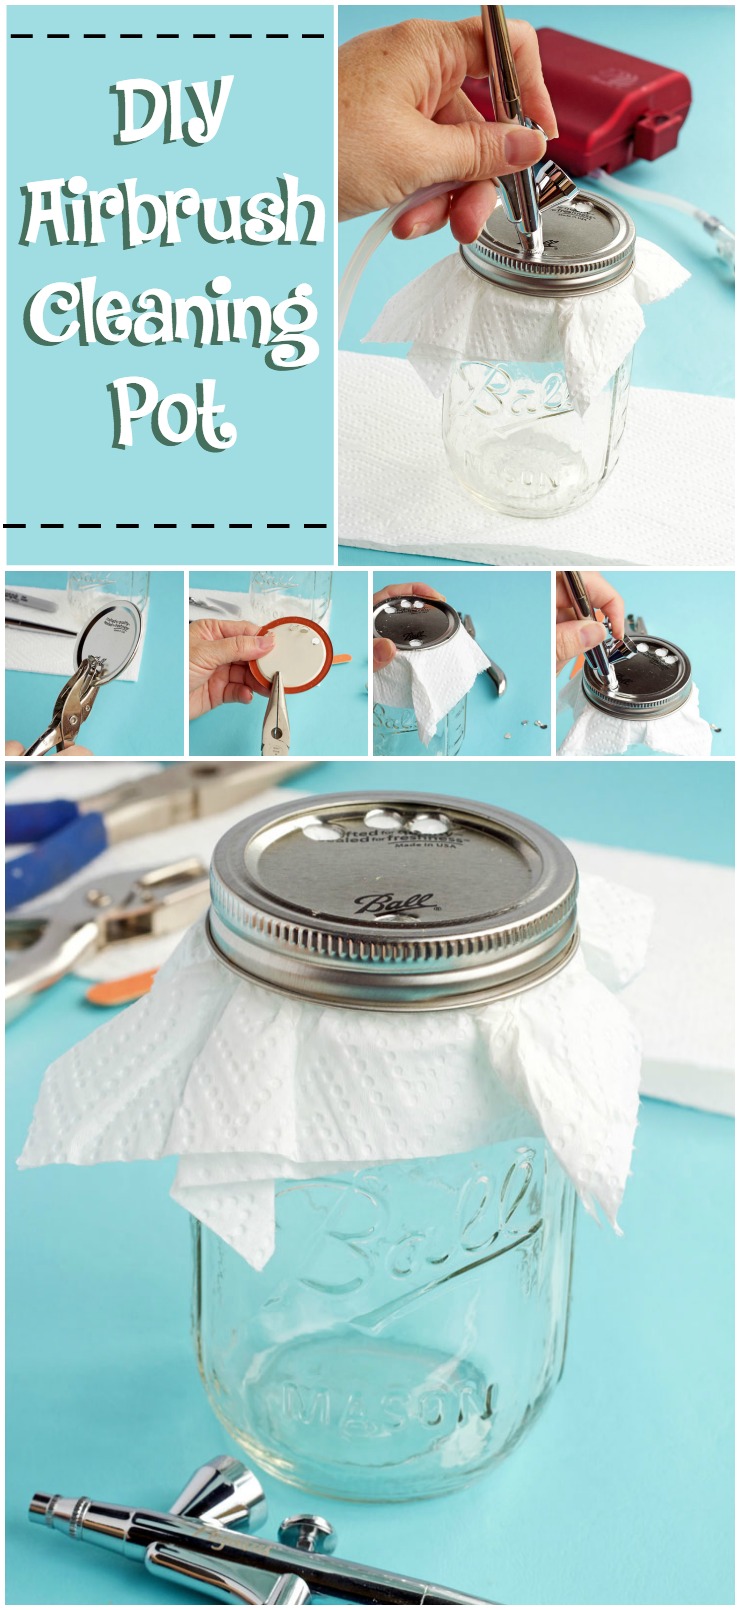 You Have to See This! A DIY Airbrush Cleaning Pot | The Bearfoot Baker